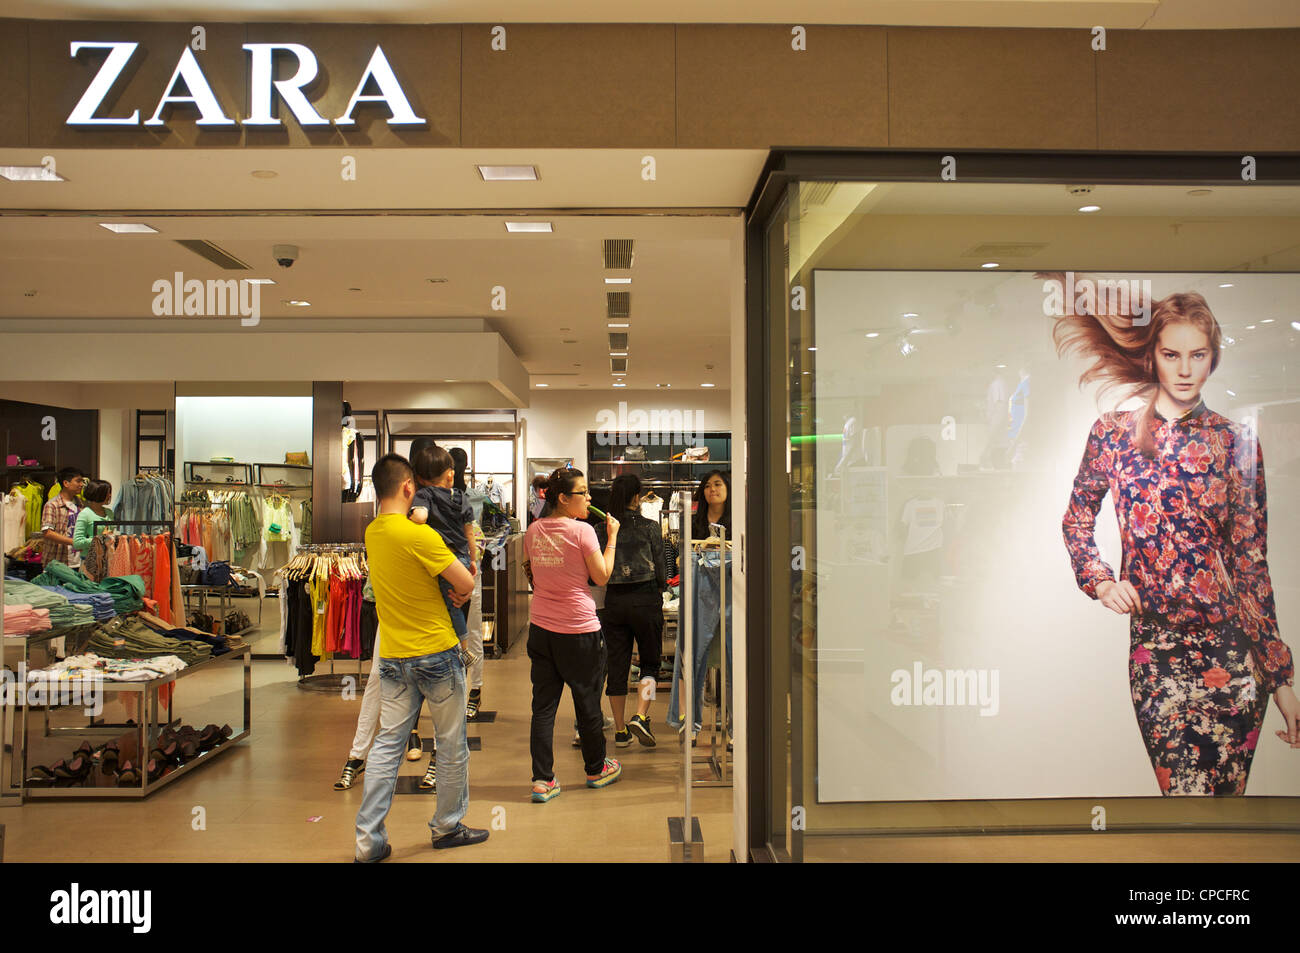 zara store high resolution stock photography and images alamy